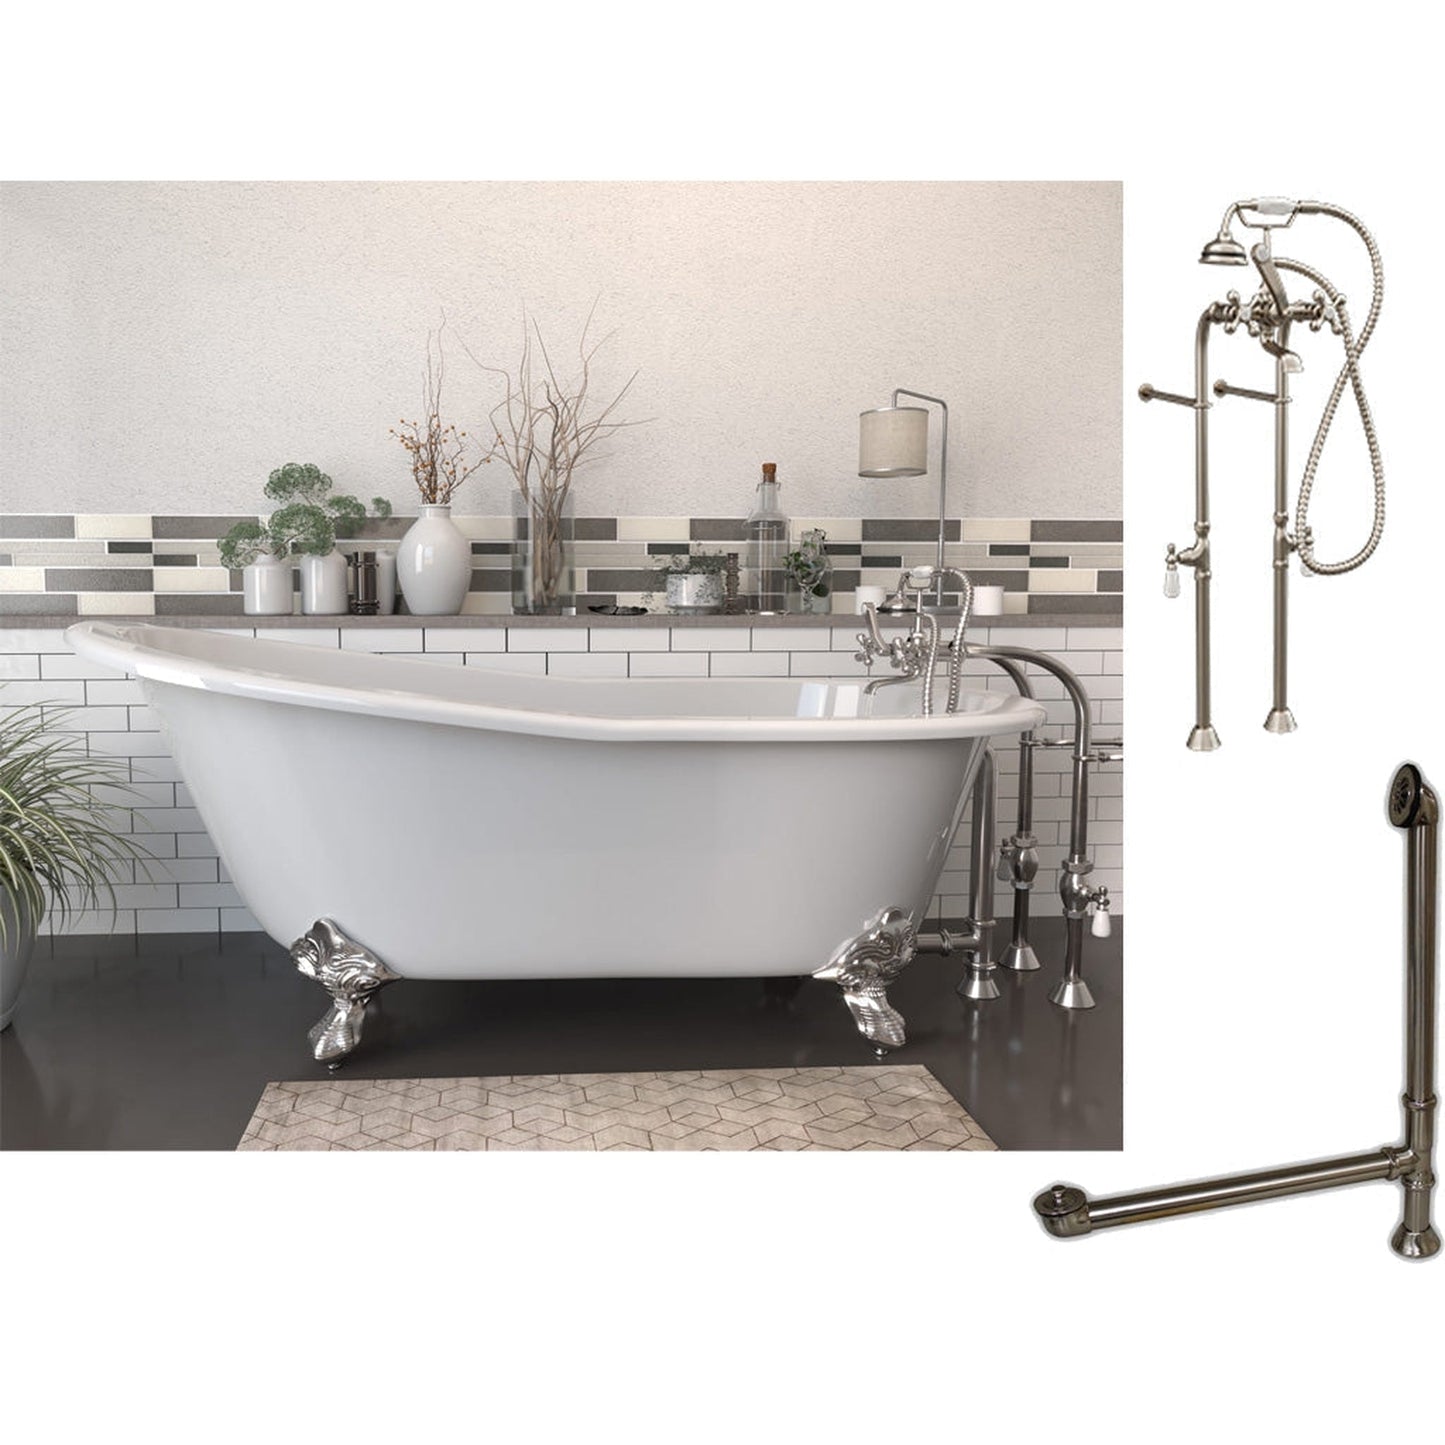 Cambridge Plumbing 61" White Cast Iron Clawfoot Bathtub With No Deck Holes And Complete Plumbing Package Including Floor Mounted British Telephone Faucet, Drain And Overflow Assembly In Brushed Nickel